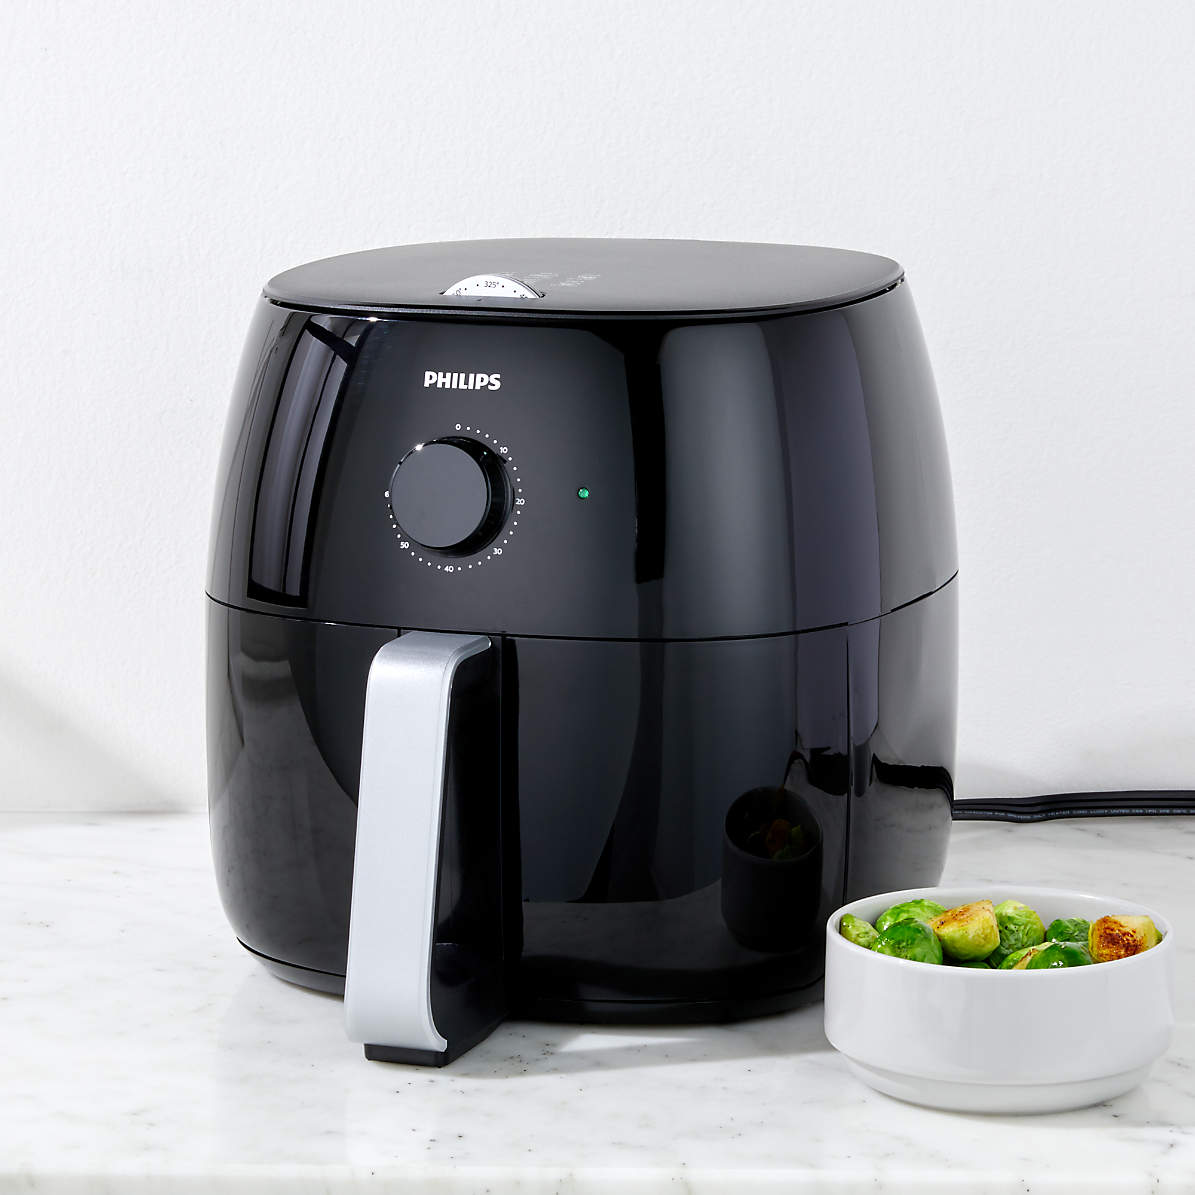 Peregrination slipper floating Philips Twin Turbo Star XXL Basket AirFryer + Reviews | Crate & Barrel